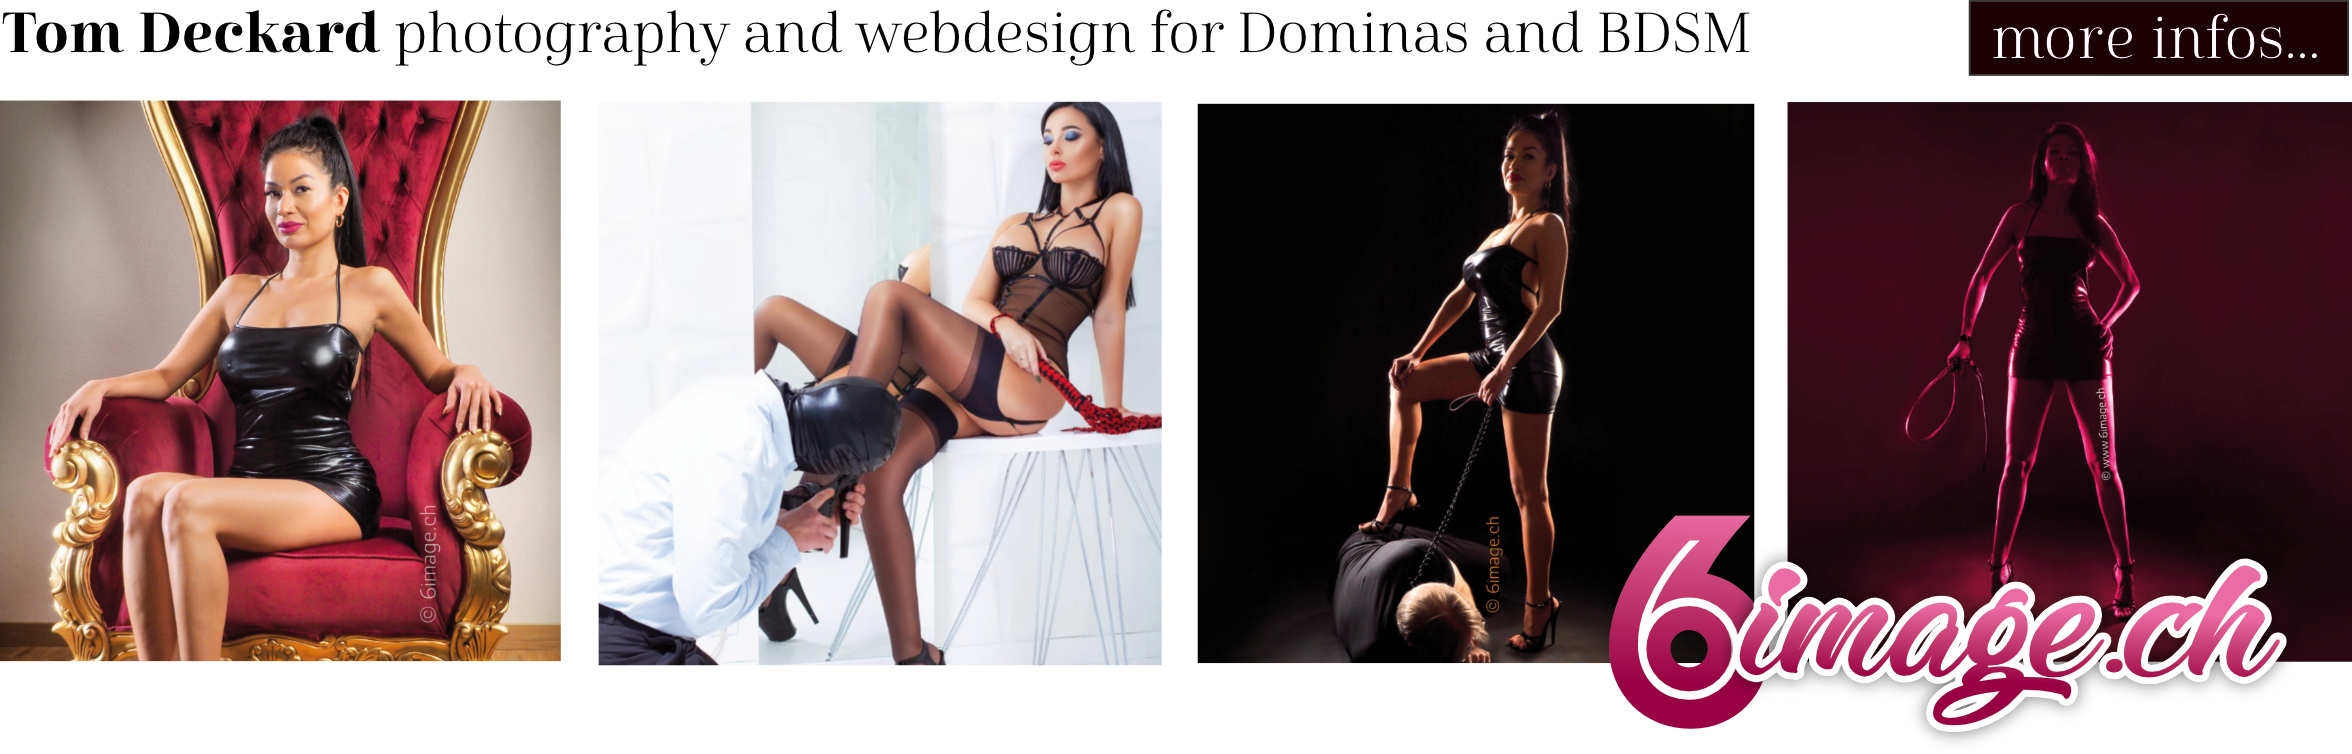 Photography for femdom and BDSM